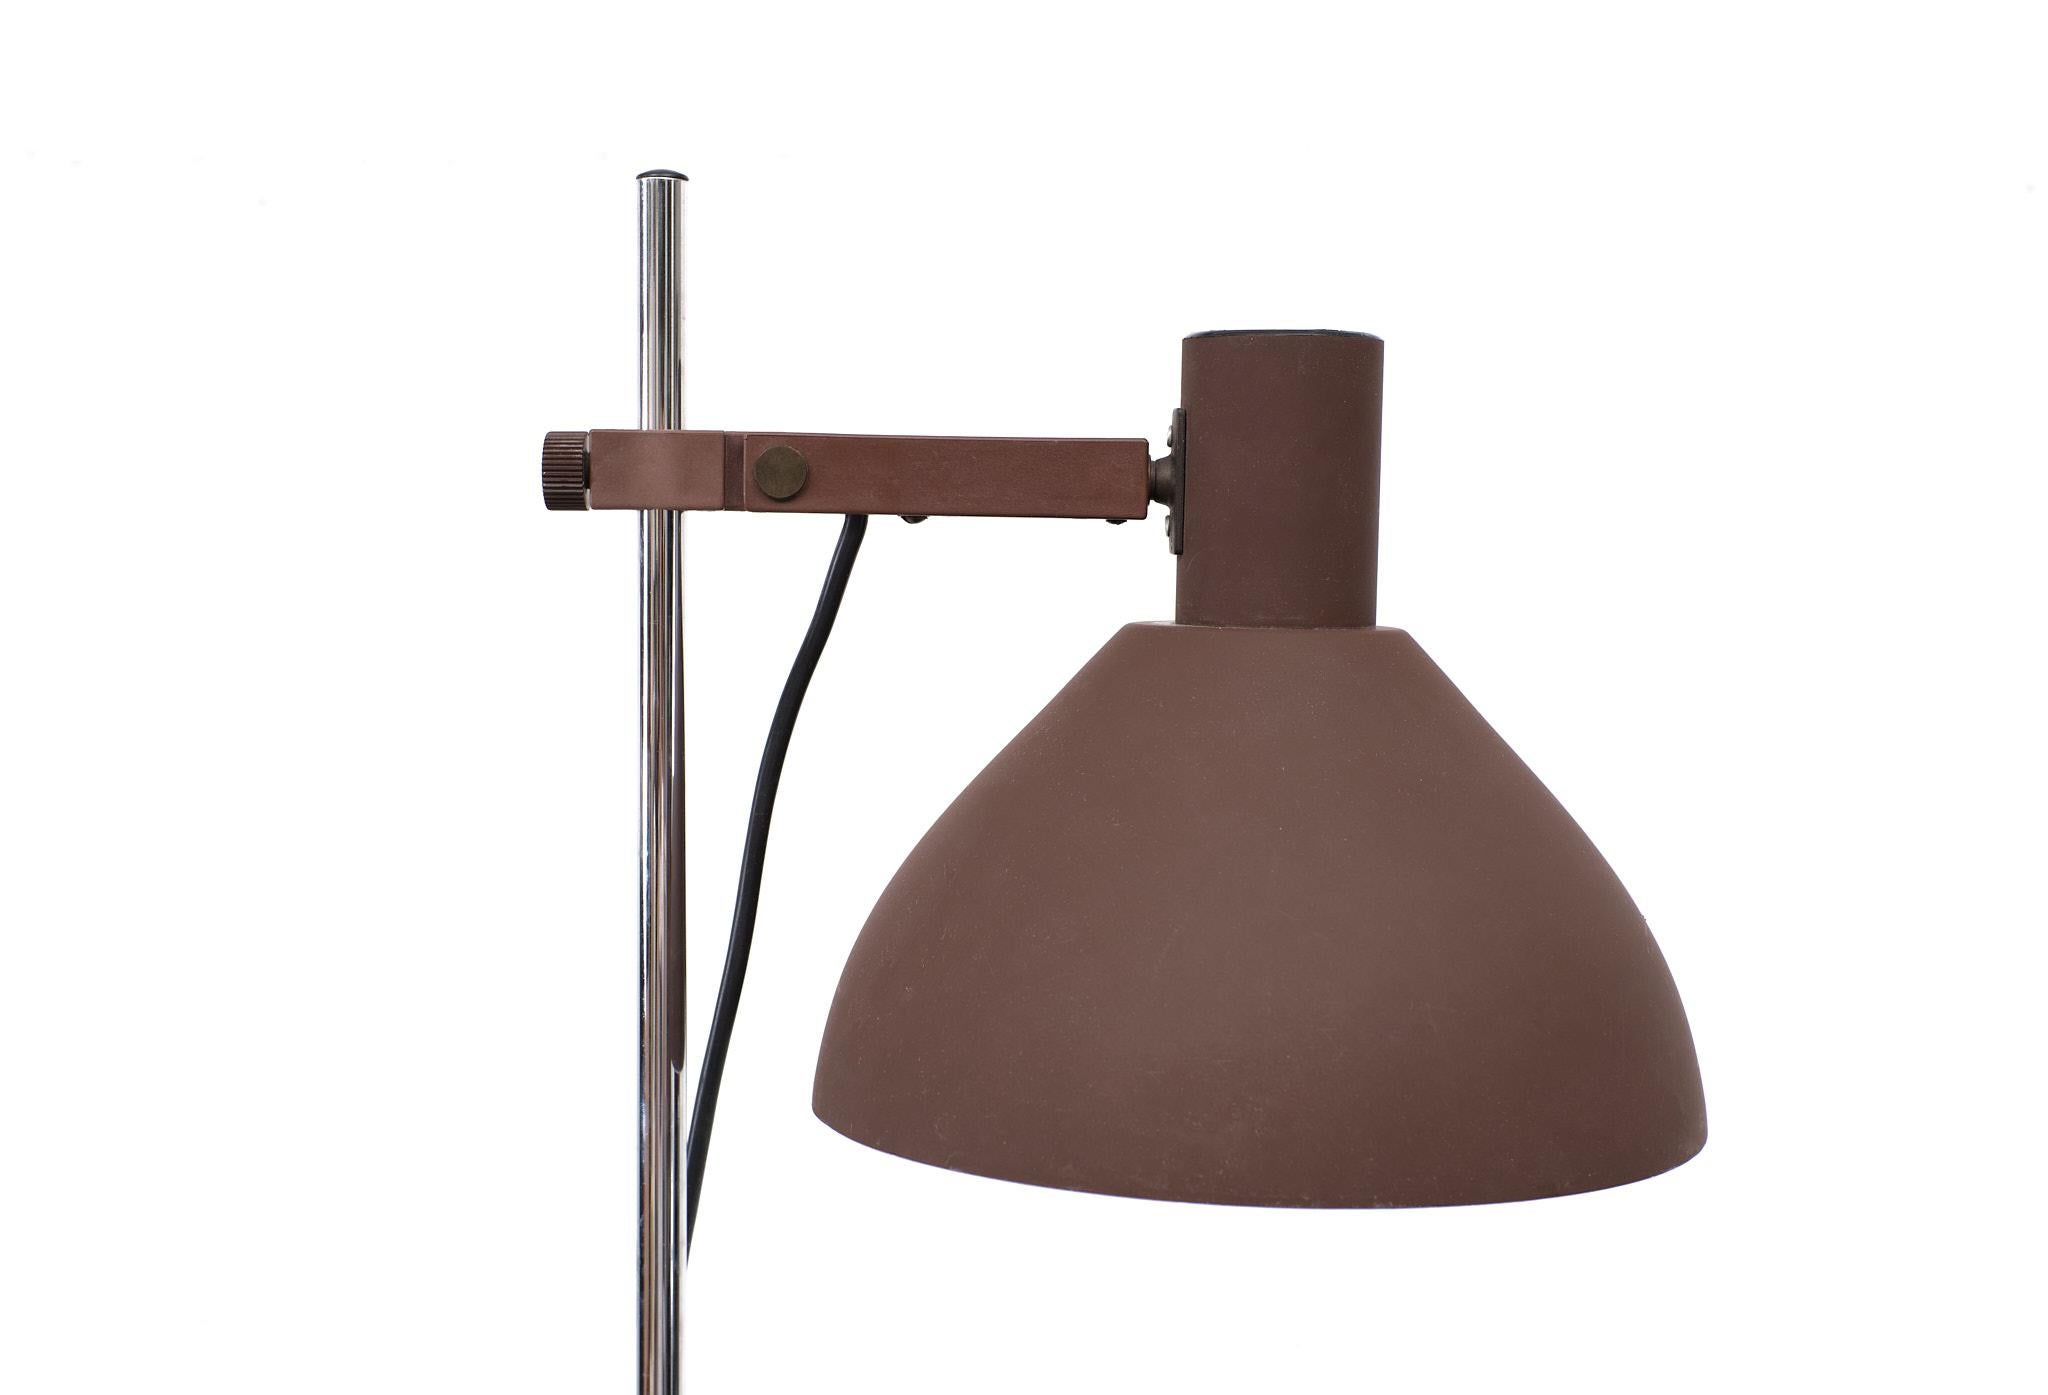 Very nice Desk lamp .Chrome on steel base and upright .Comes with a Mocha Brown 
color shade ,typical for that time . Adjustable in height . One large E27 bulb needed .

